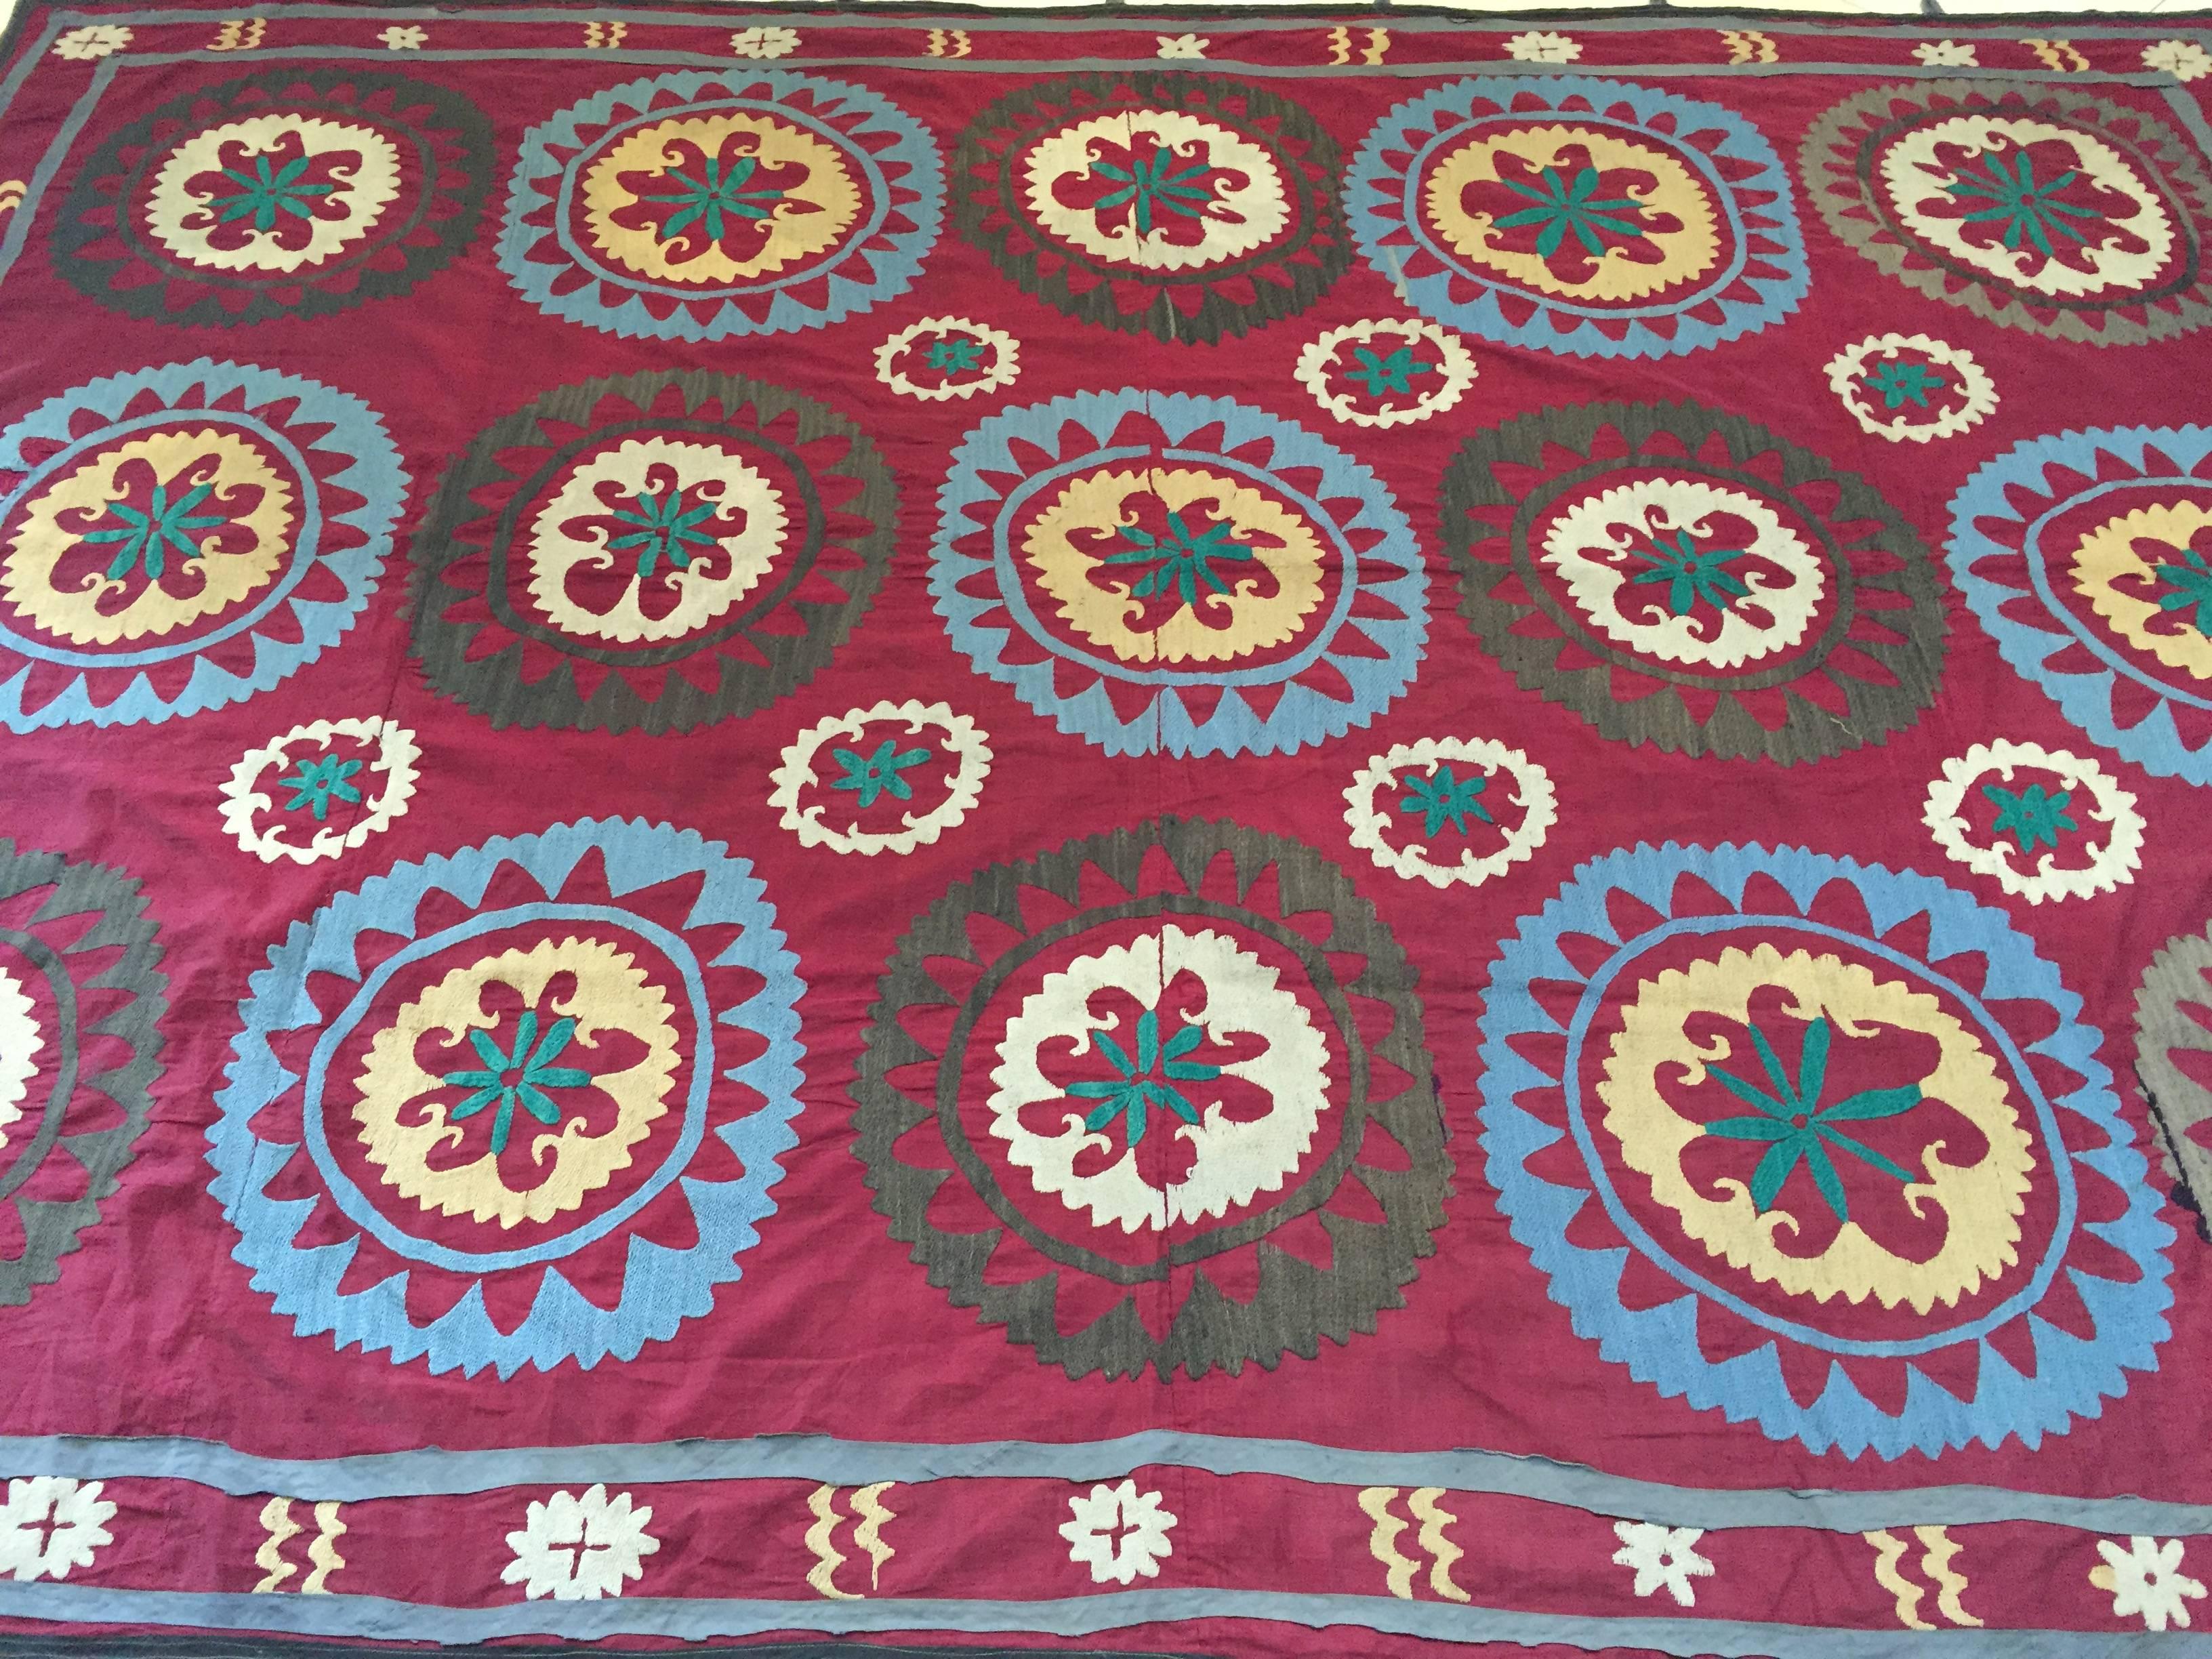 Large vintage Suzani Uzbek Samarkand textile, Suzani means needlework and these embroideries are some of the most characteristic forms of textile art from Central Asia.
A beautiful old Turkish embroidered Suzani textile from Uzbekistan. 
The motifs